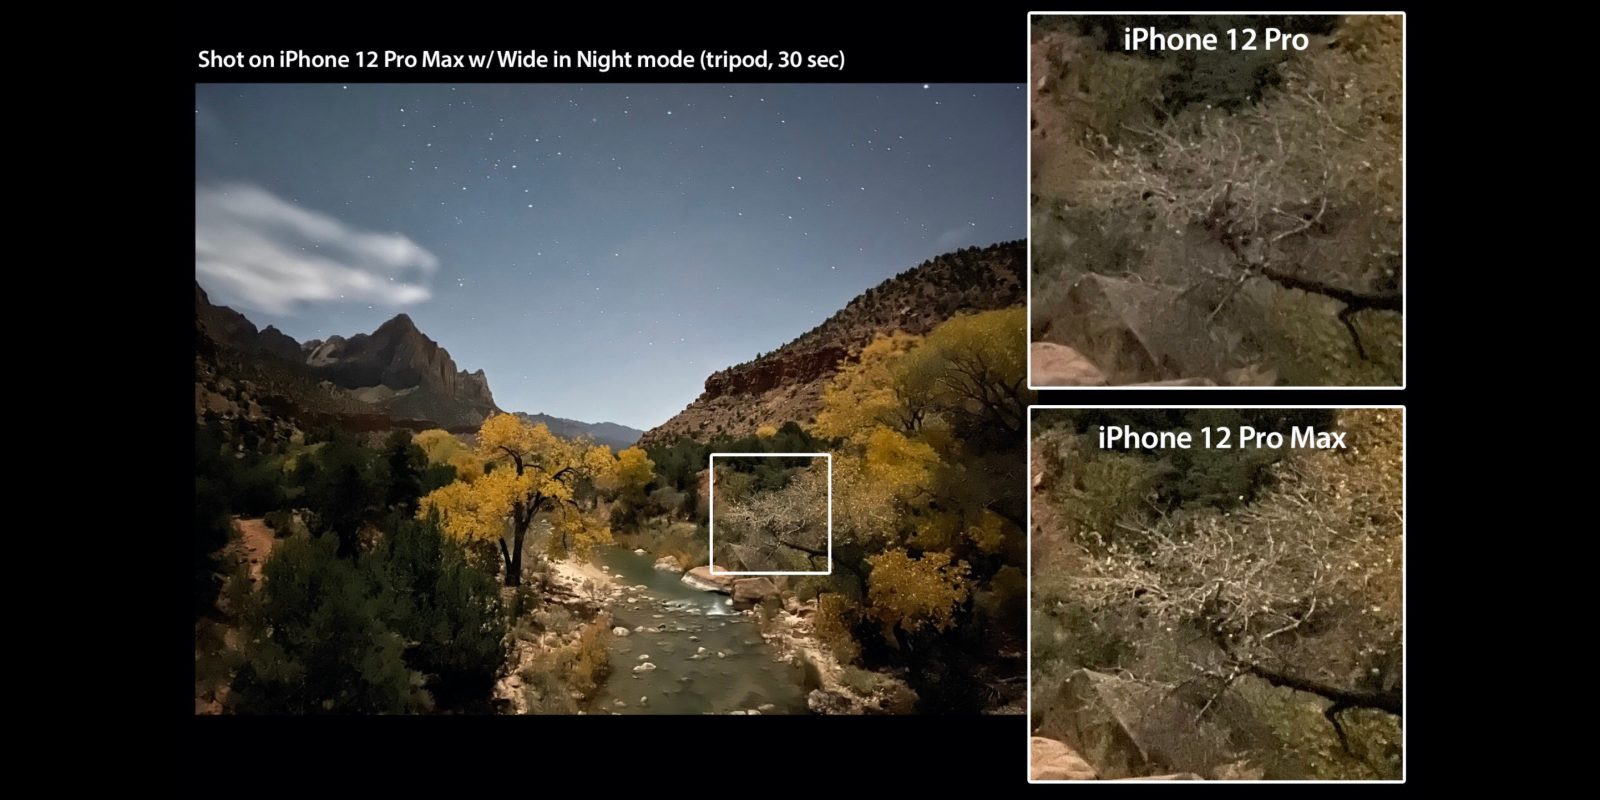 Gallery: Travel photographer Austin Mann compares iPhone 12 Pro and